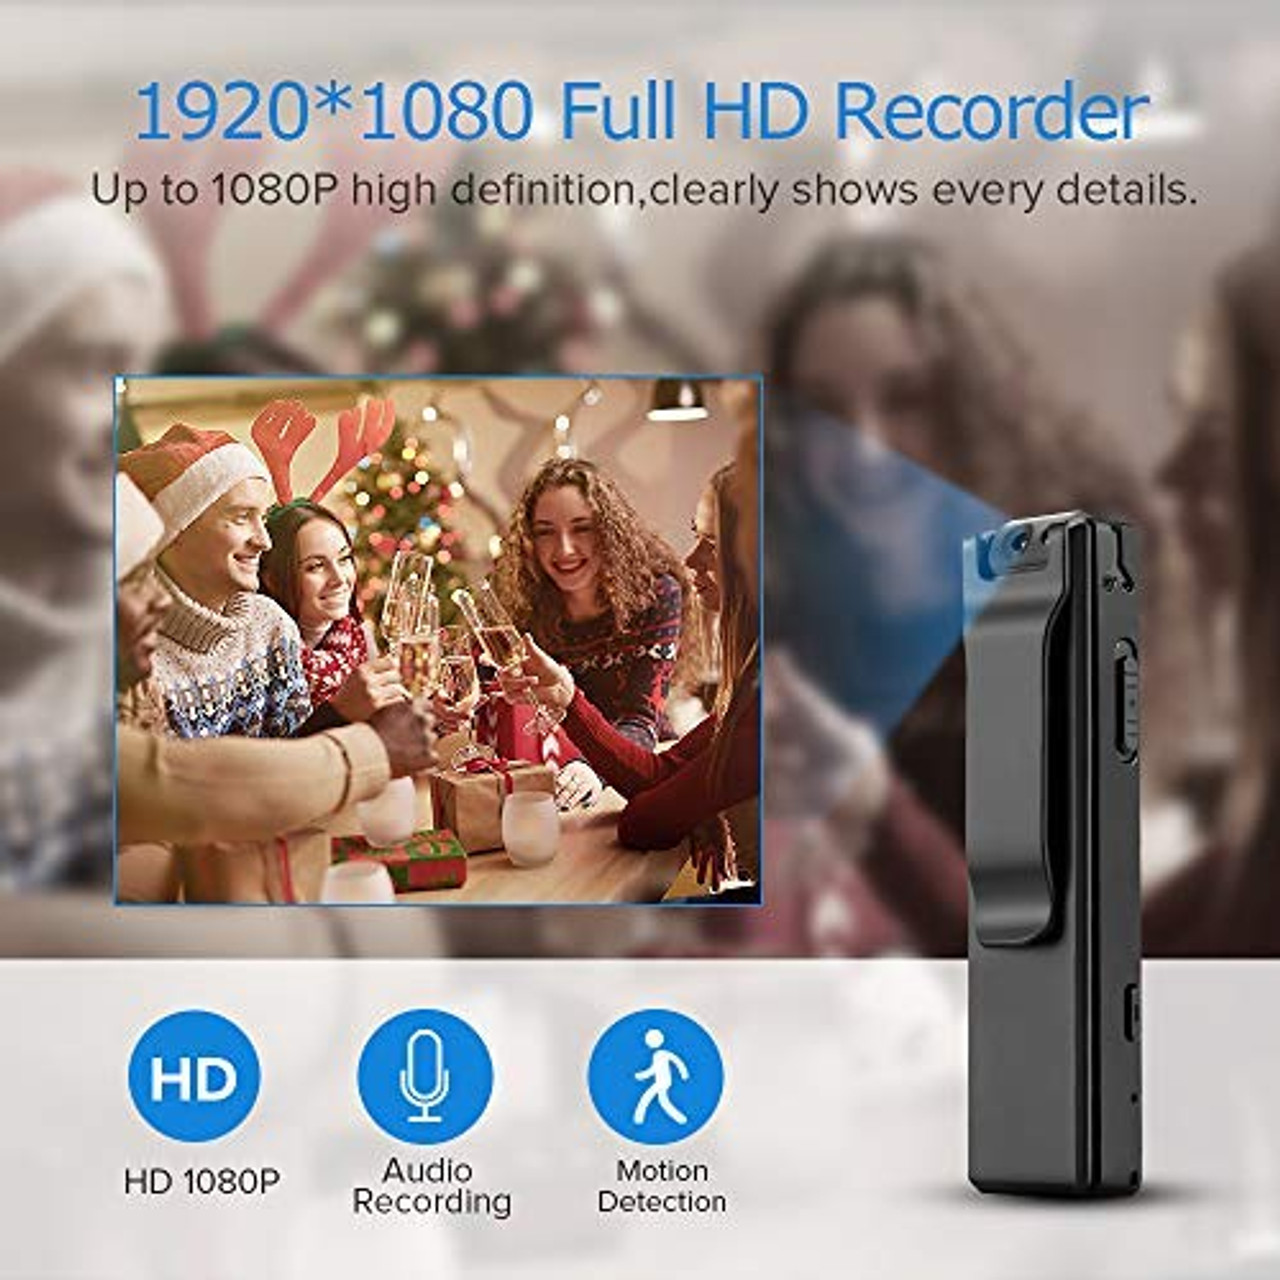 Full HD 1080P Wearable Pocket Camcorder with Motion Detection,Tiny Security Surveillance Nanny Camera for Home and Office Mini Body Camera 32G TF Card Included 